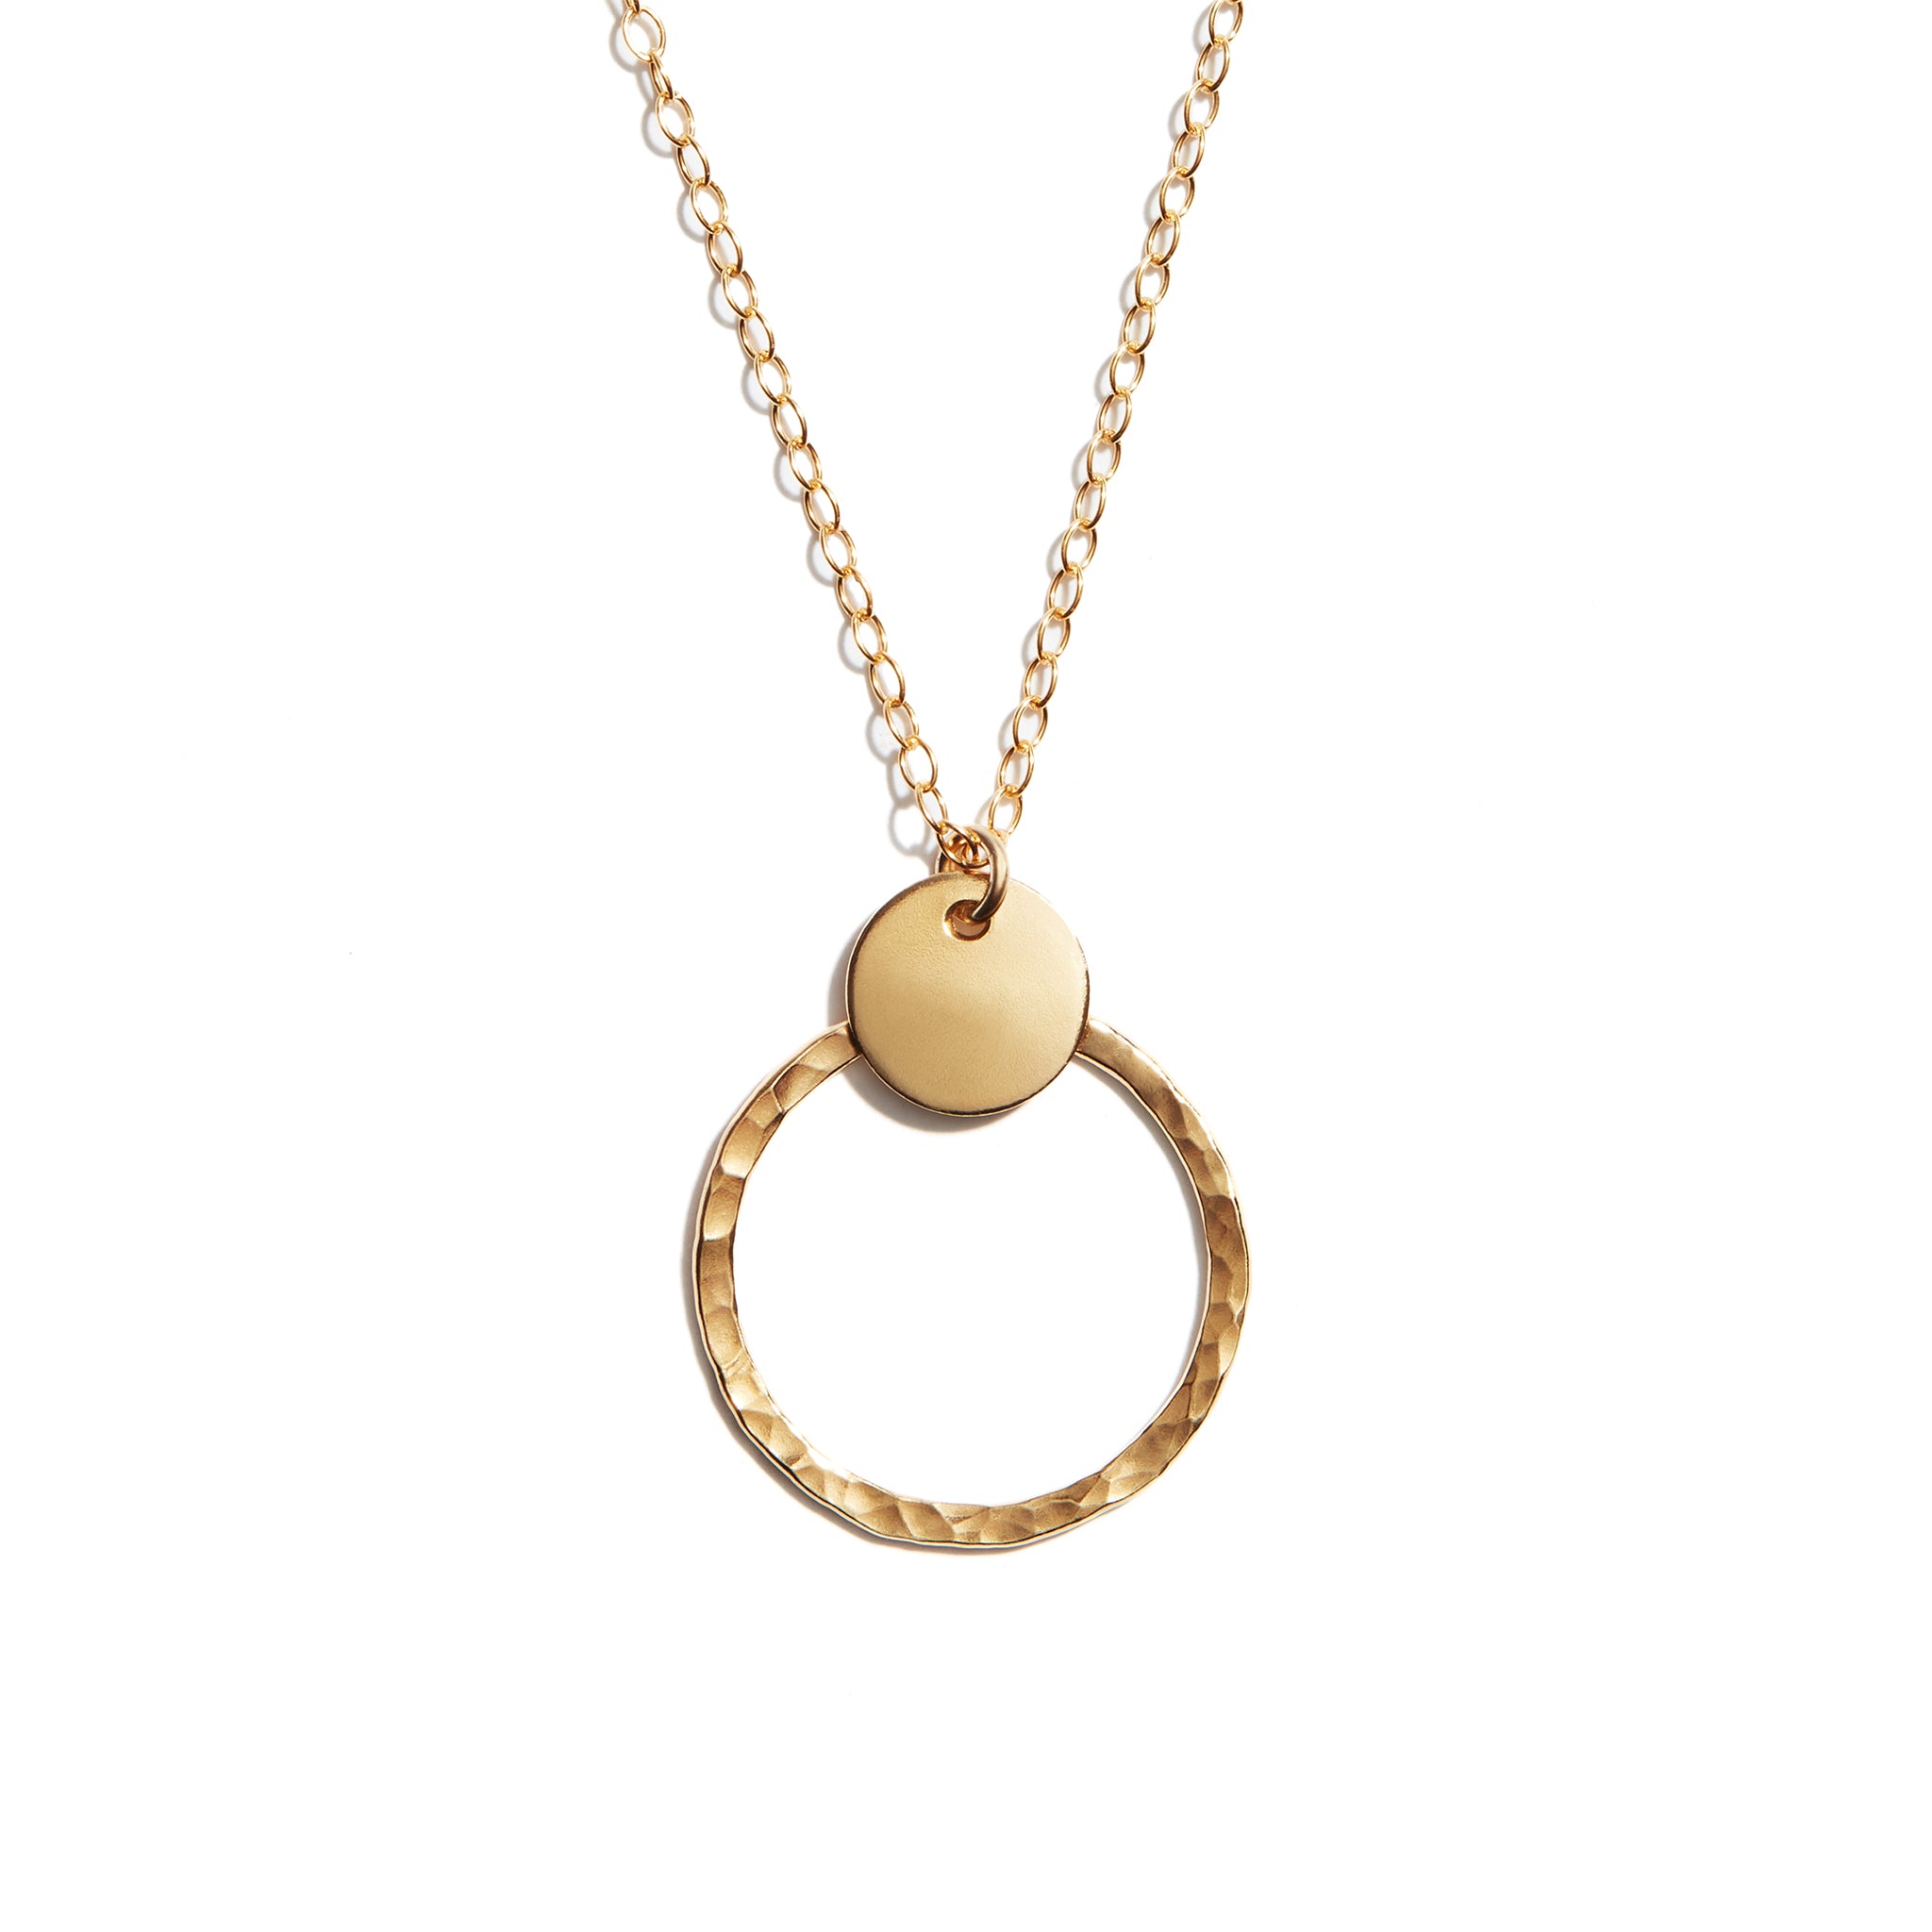 Close-up photo of a duo disk necklace crafted from 14 carat gold fill. Perfect for adding elegance to any outfit.